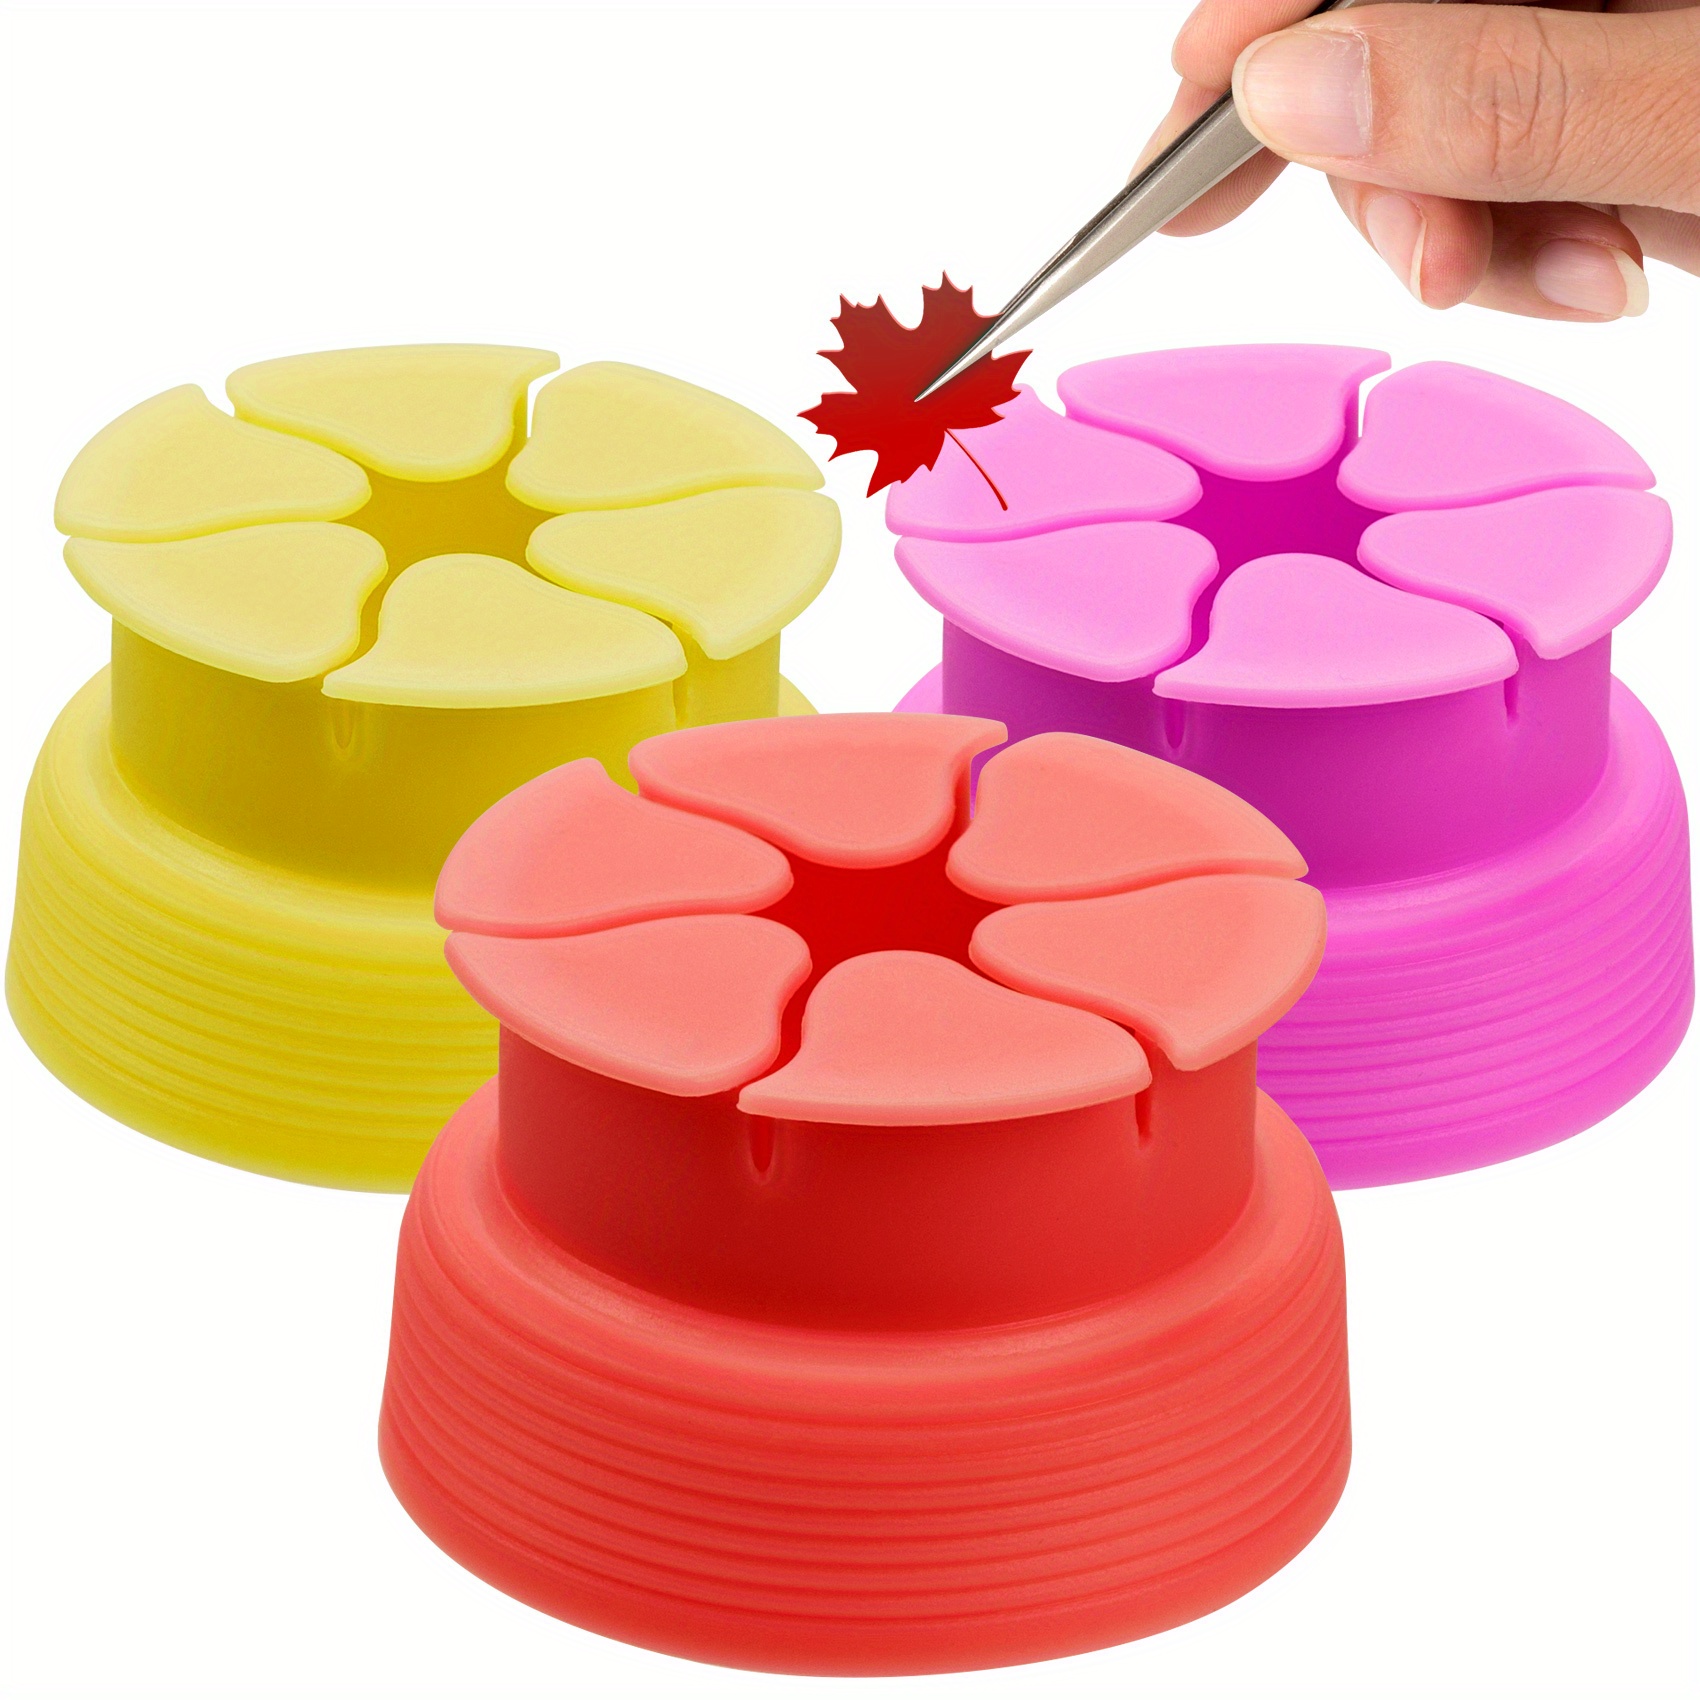 Suctioned Vinyl Weeding Scrap Collector, Silicone Suction Cups For Vinyl  Disposing, Craft Weeding Tools Holder Set Kit